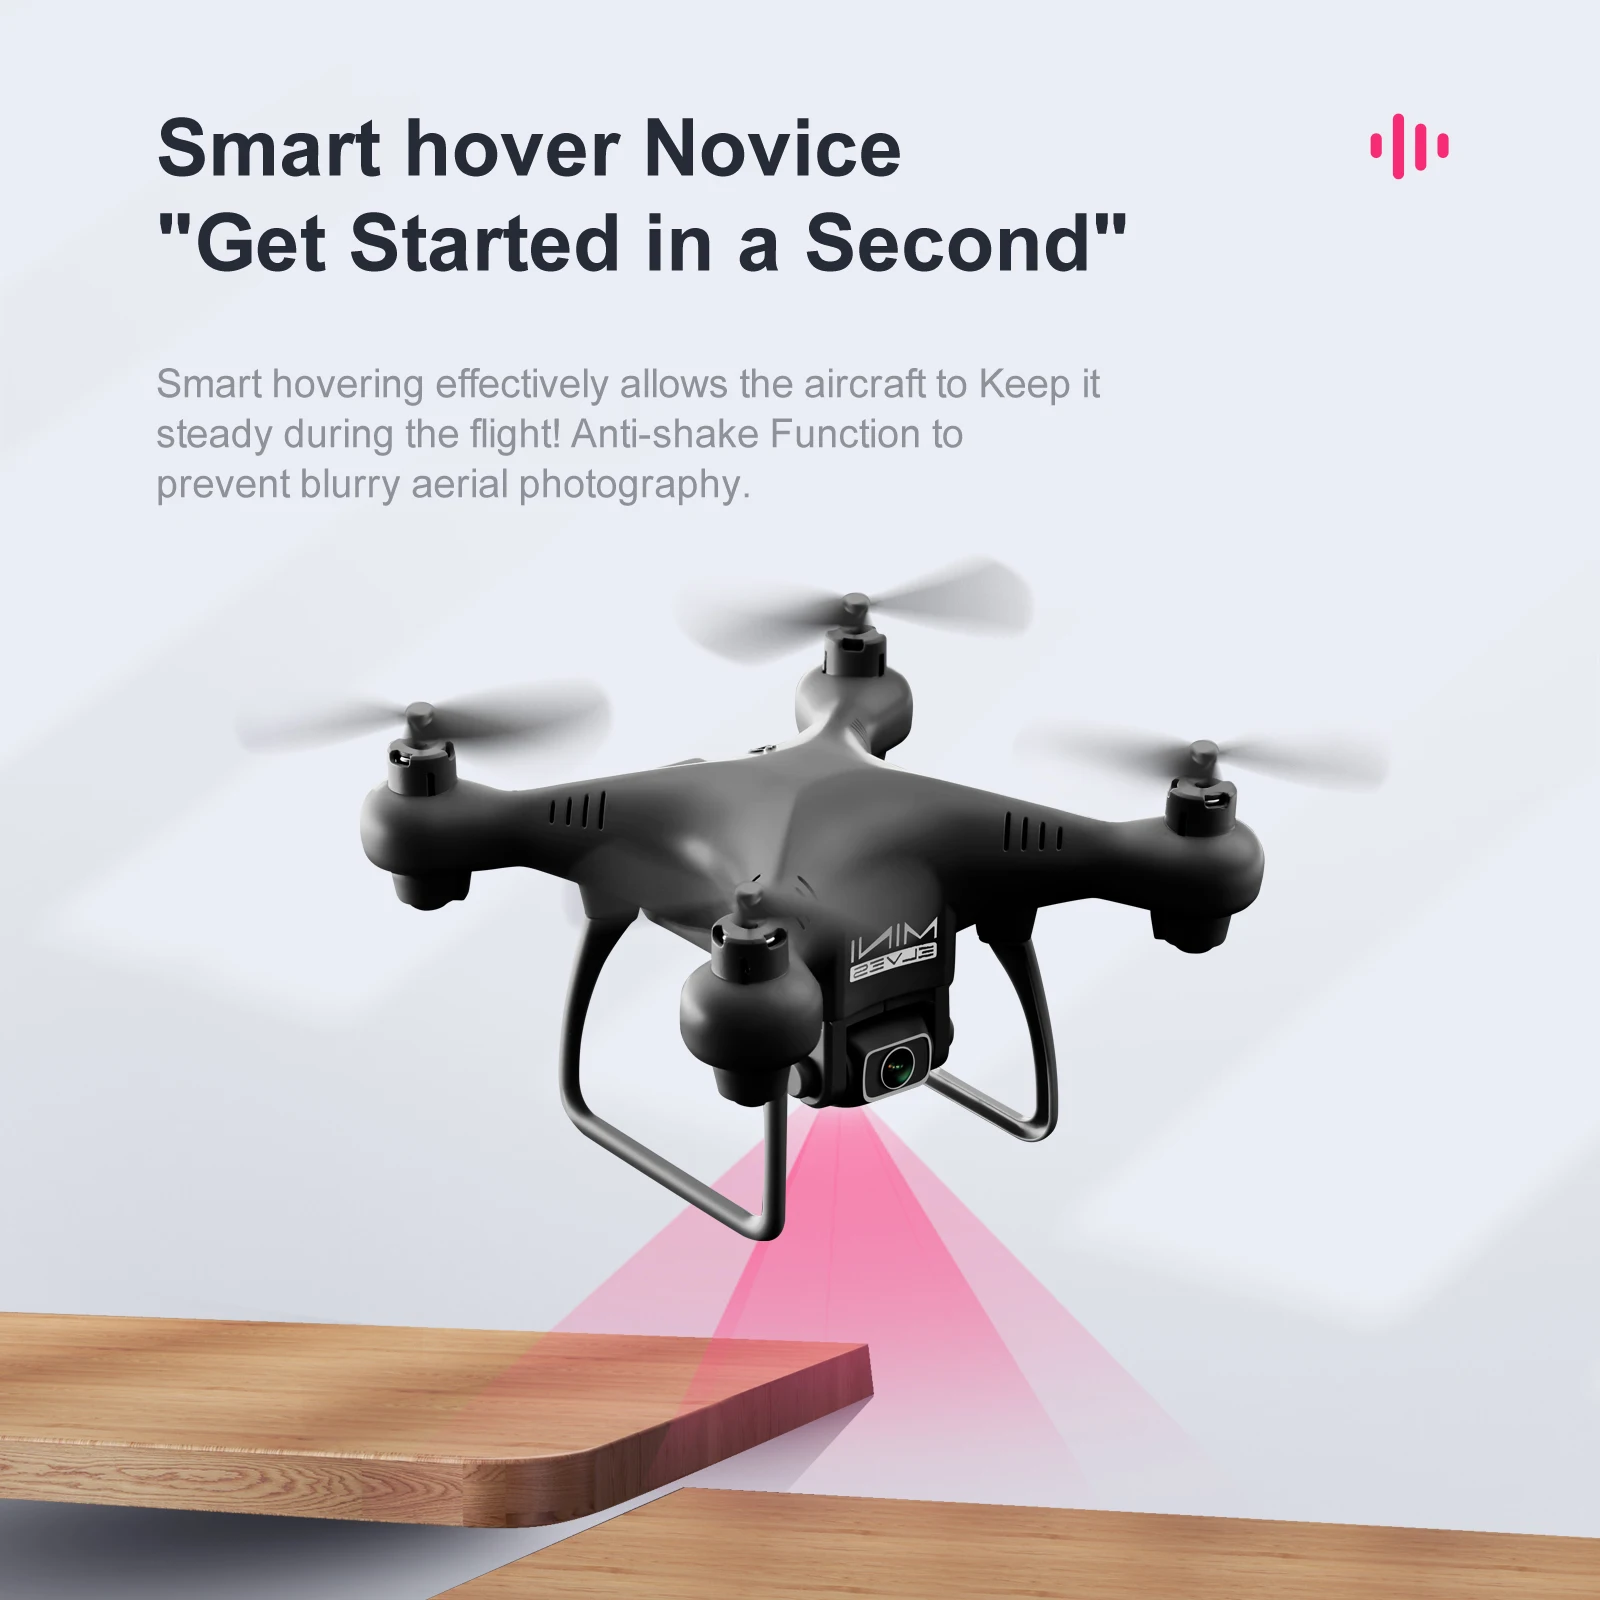 KY908 Mini Drone, smart hover novice "get started in a second" smart hovering